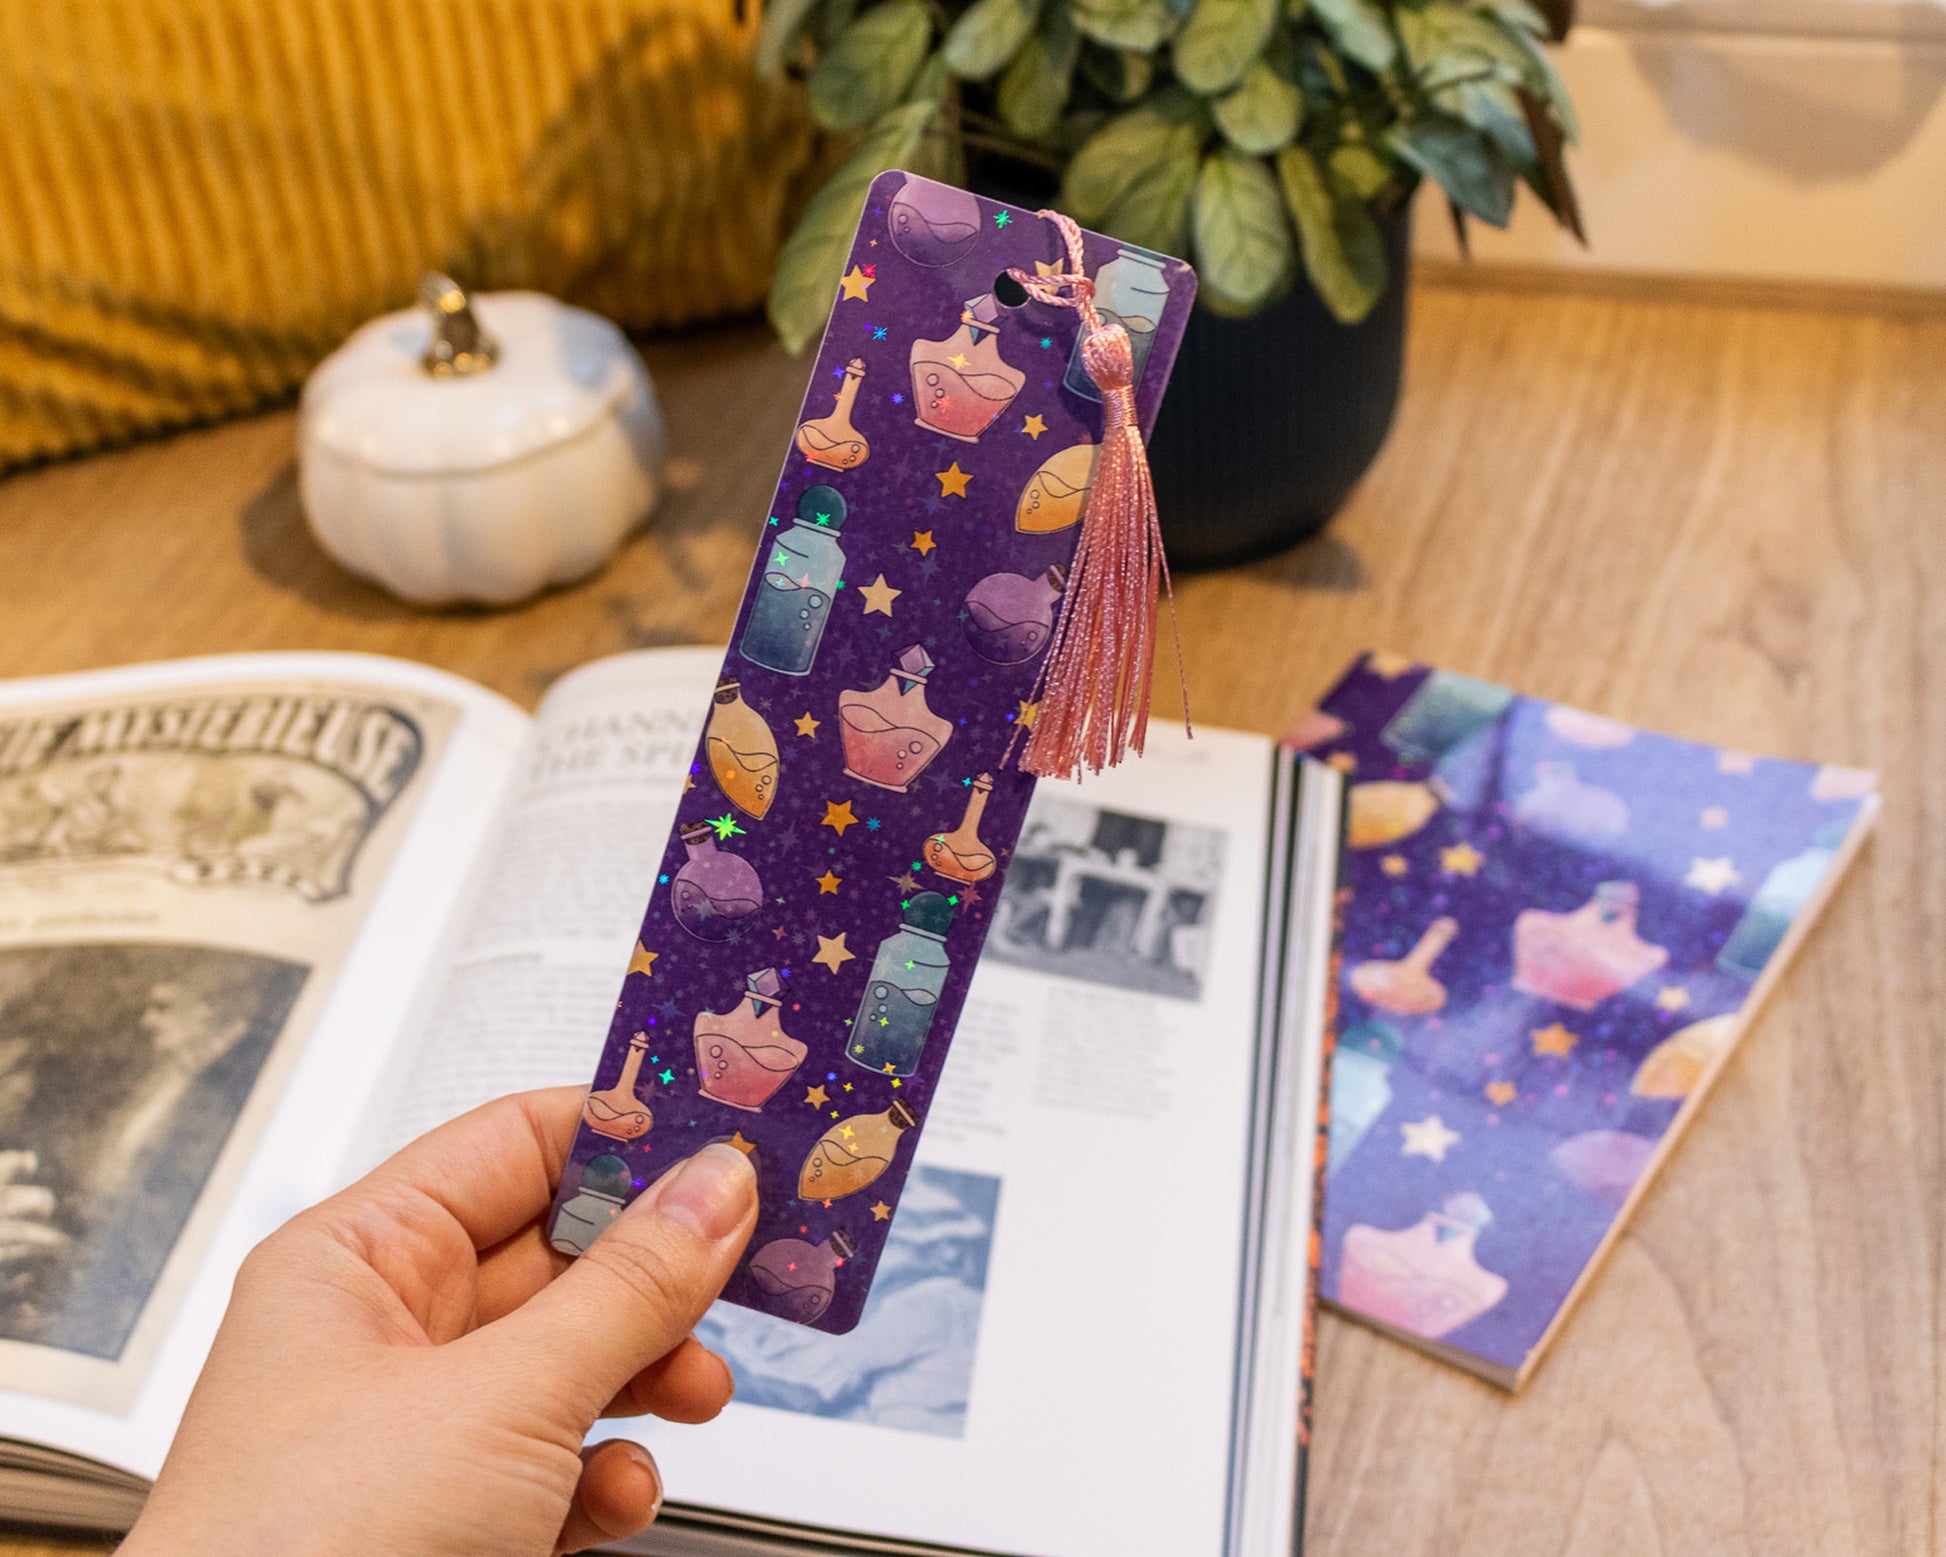 Handmade Bookmark with Tassel and Holographic Magic Potion Pattern - held in hand